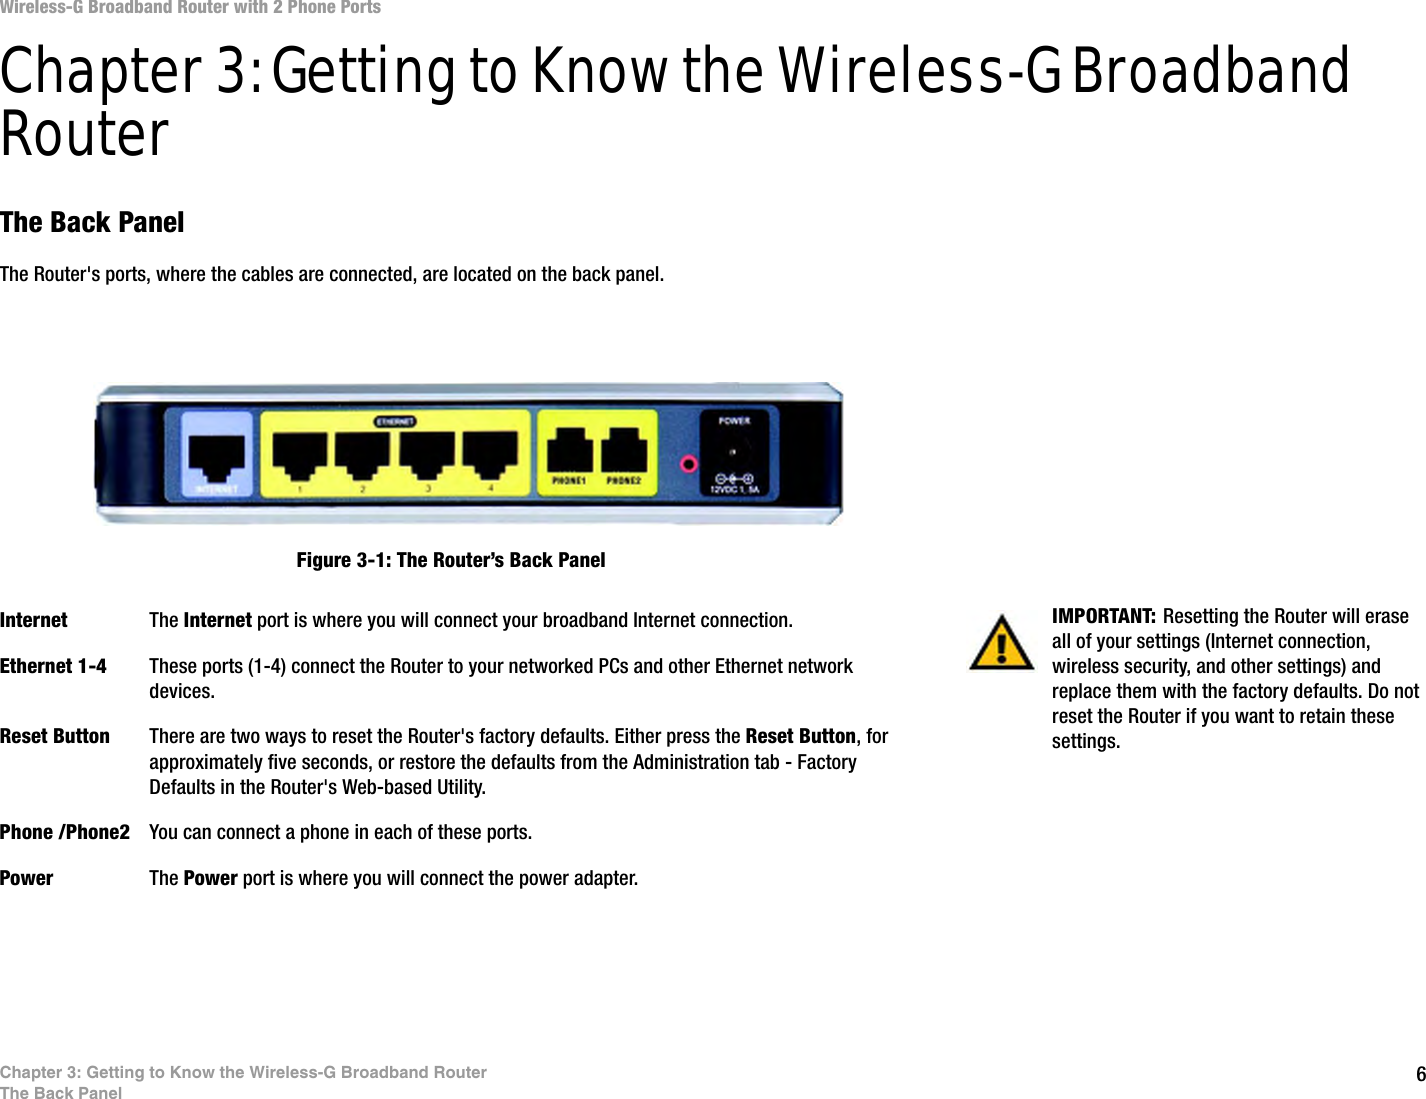 6Chapter 3: Getting to Know the Wireless-G Broadband RouterThe Back PanelWireless-G Broadband Router with 2 Phone PortsChapter 3: Getting to Know the Wireless-G Broadband RouterThe Back PanelThe Router&apos;s ports, where the cables are connected, are located on the back panel.Internet The Internet port is where you will connect your broadband Internet connection.Ethernet 1-4 These ports (1-4) connect the Router to your networked PCs and other Ethernet network devices.Reset Button There are two ways to reset the Router&apos;s factory defaults. Either press the Reset Button, for approximately five seconds, or restore the defaults from the Administration tab - Factory Defaults in the Router&apos;s Web-based Utility.Phone /Phone2 You can connect a phone in each of these ports.Power The Power port is where you will connect the power adapter.IMPORTANT: Resetting the Router will erase all of your settings (Internet connection, wireless security, and other settings) and replace them with the factory defaults. Do not reset the Router if you want to retain these settings.Figure 3-1: The Router’s Back Panel